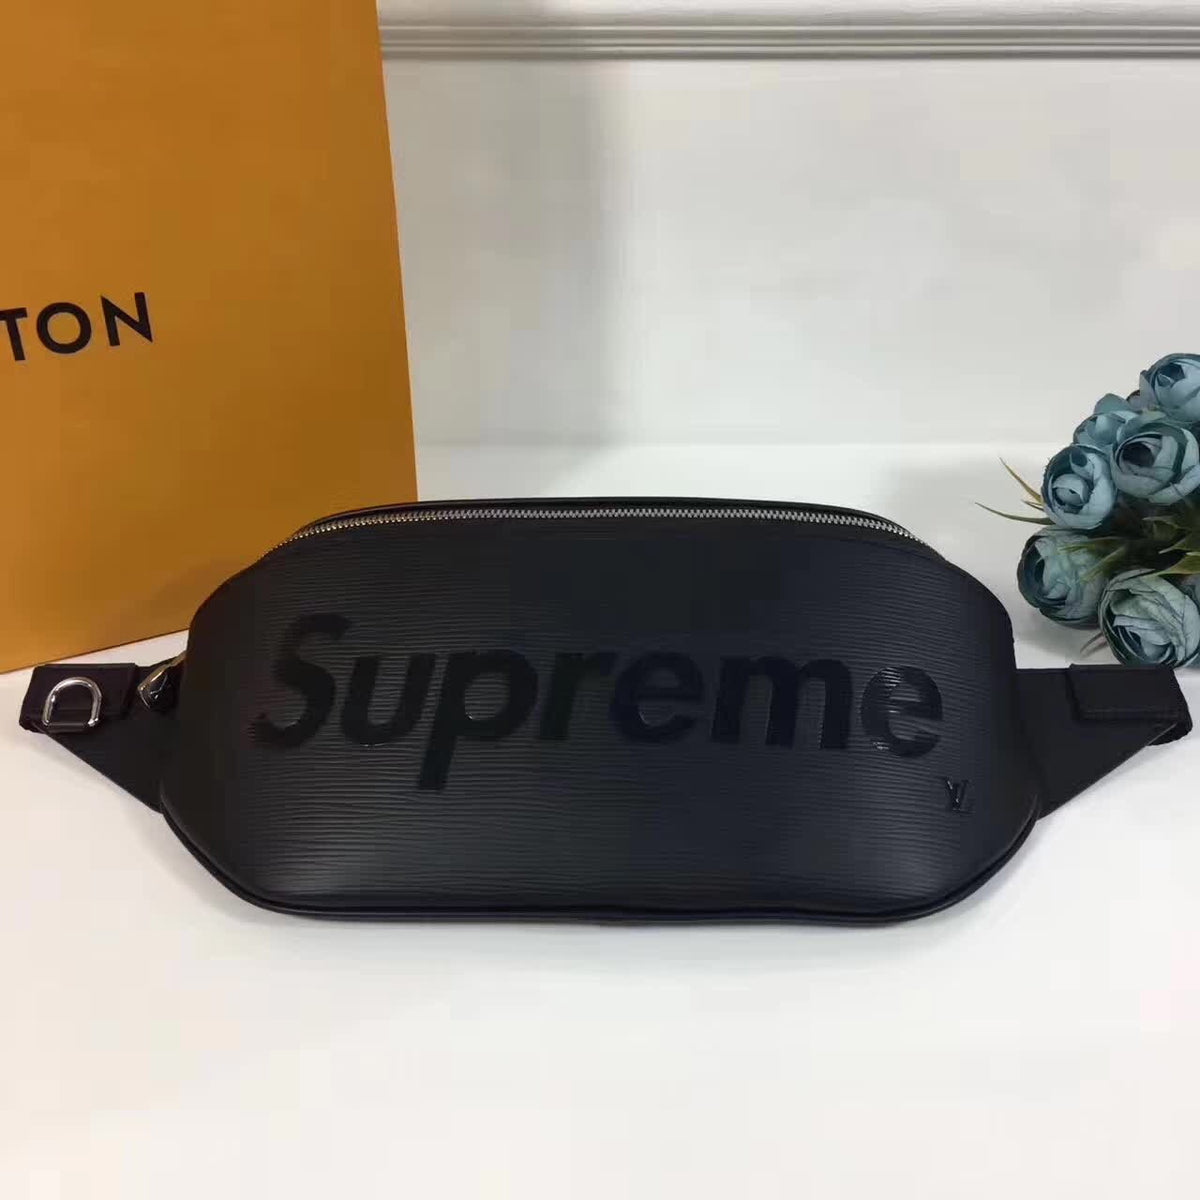 Supreme X Louis Vuitton All Black Fanny Pack for Sale in